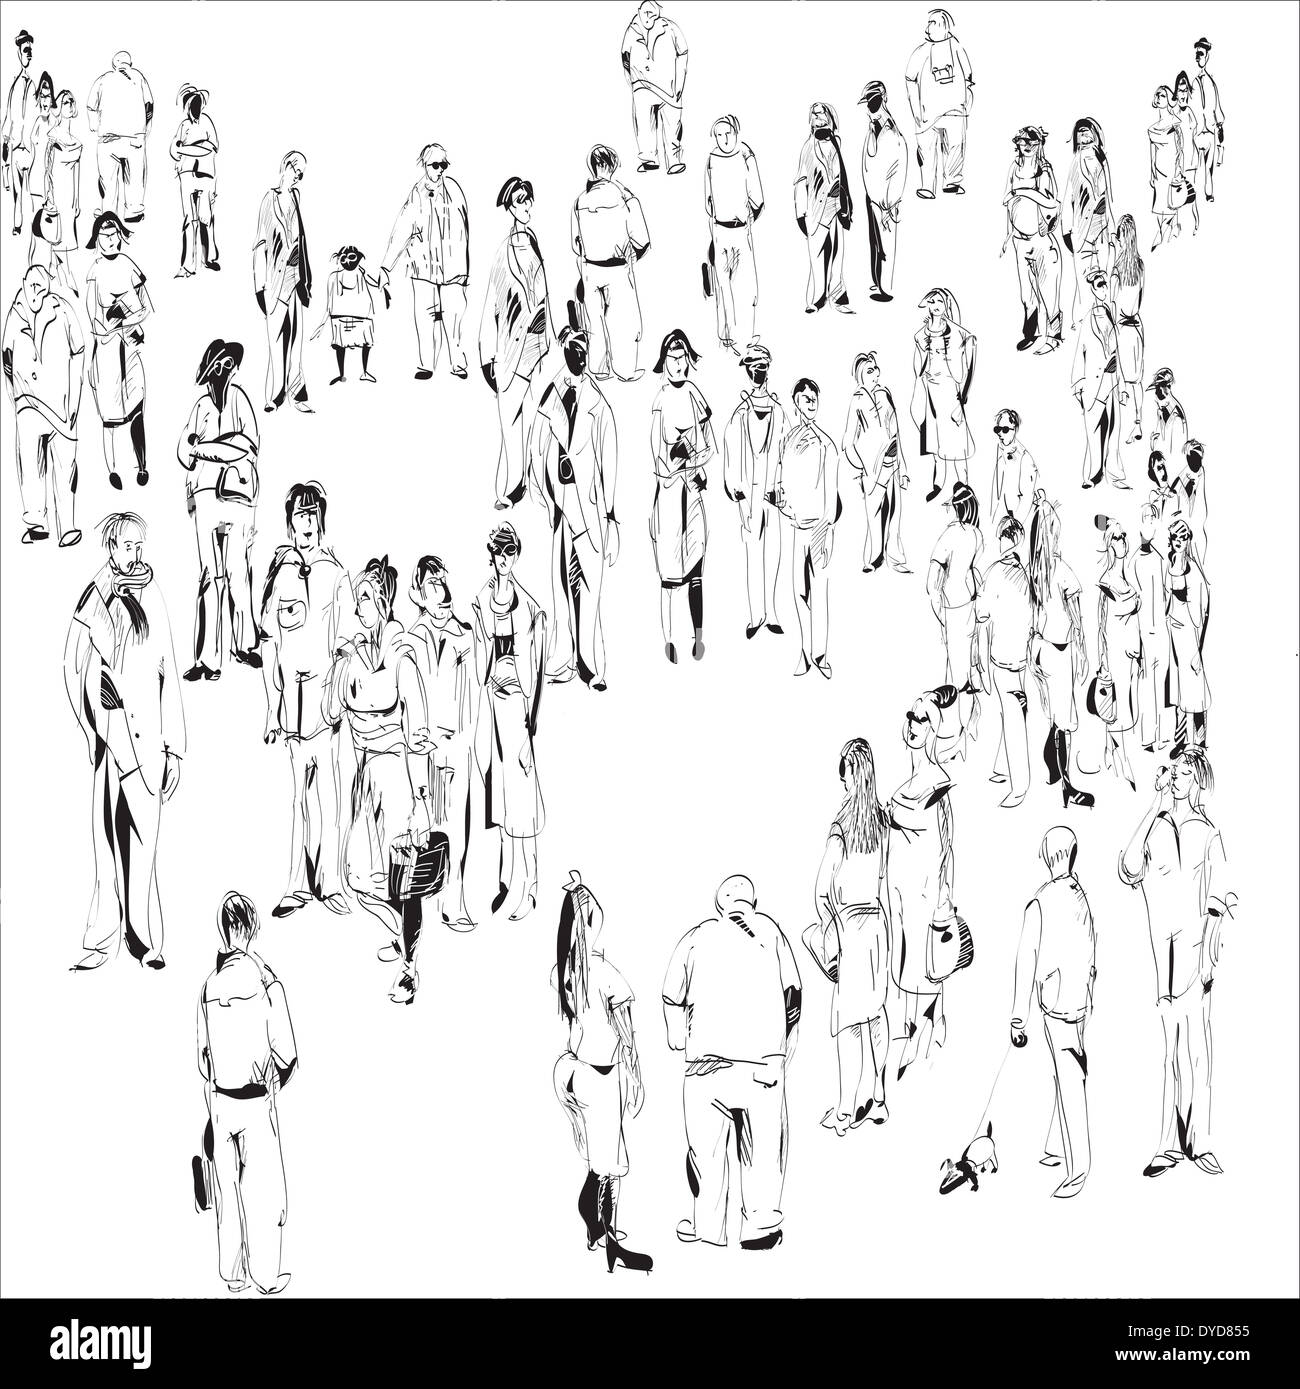 Crowd Drawing Vector Images (over 4,500)